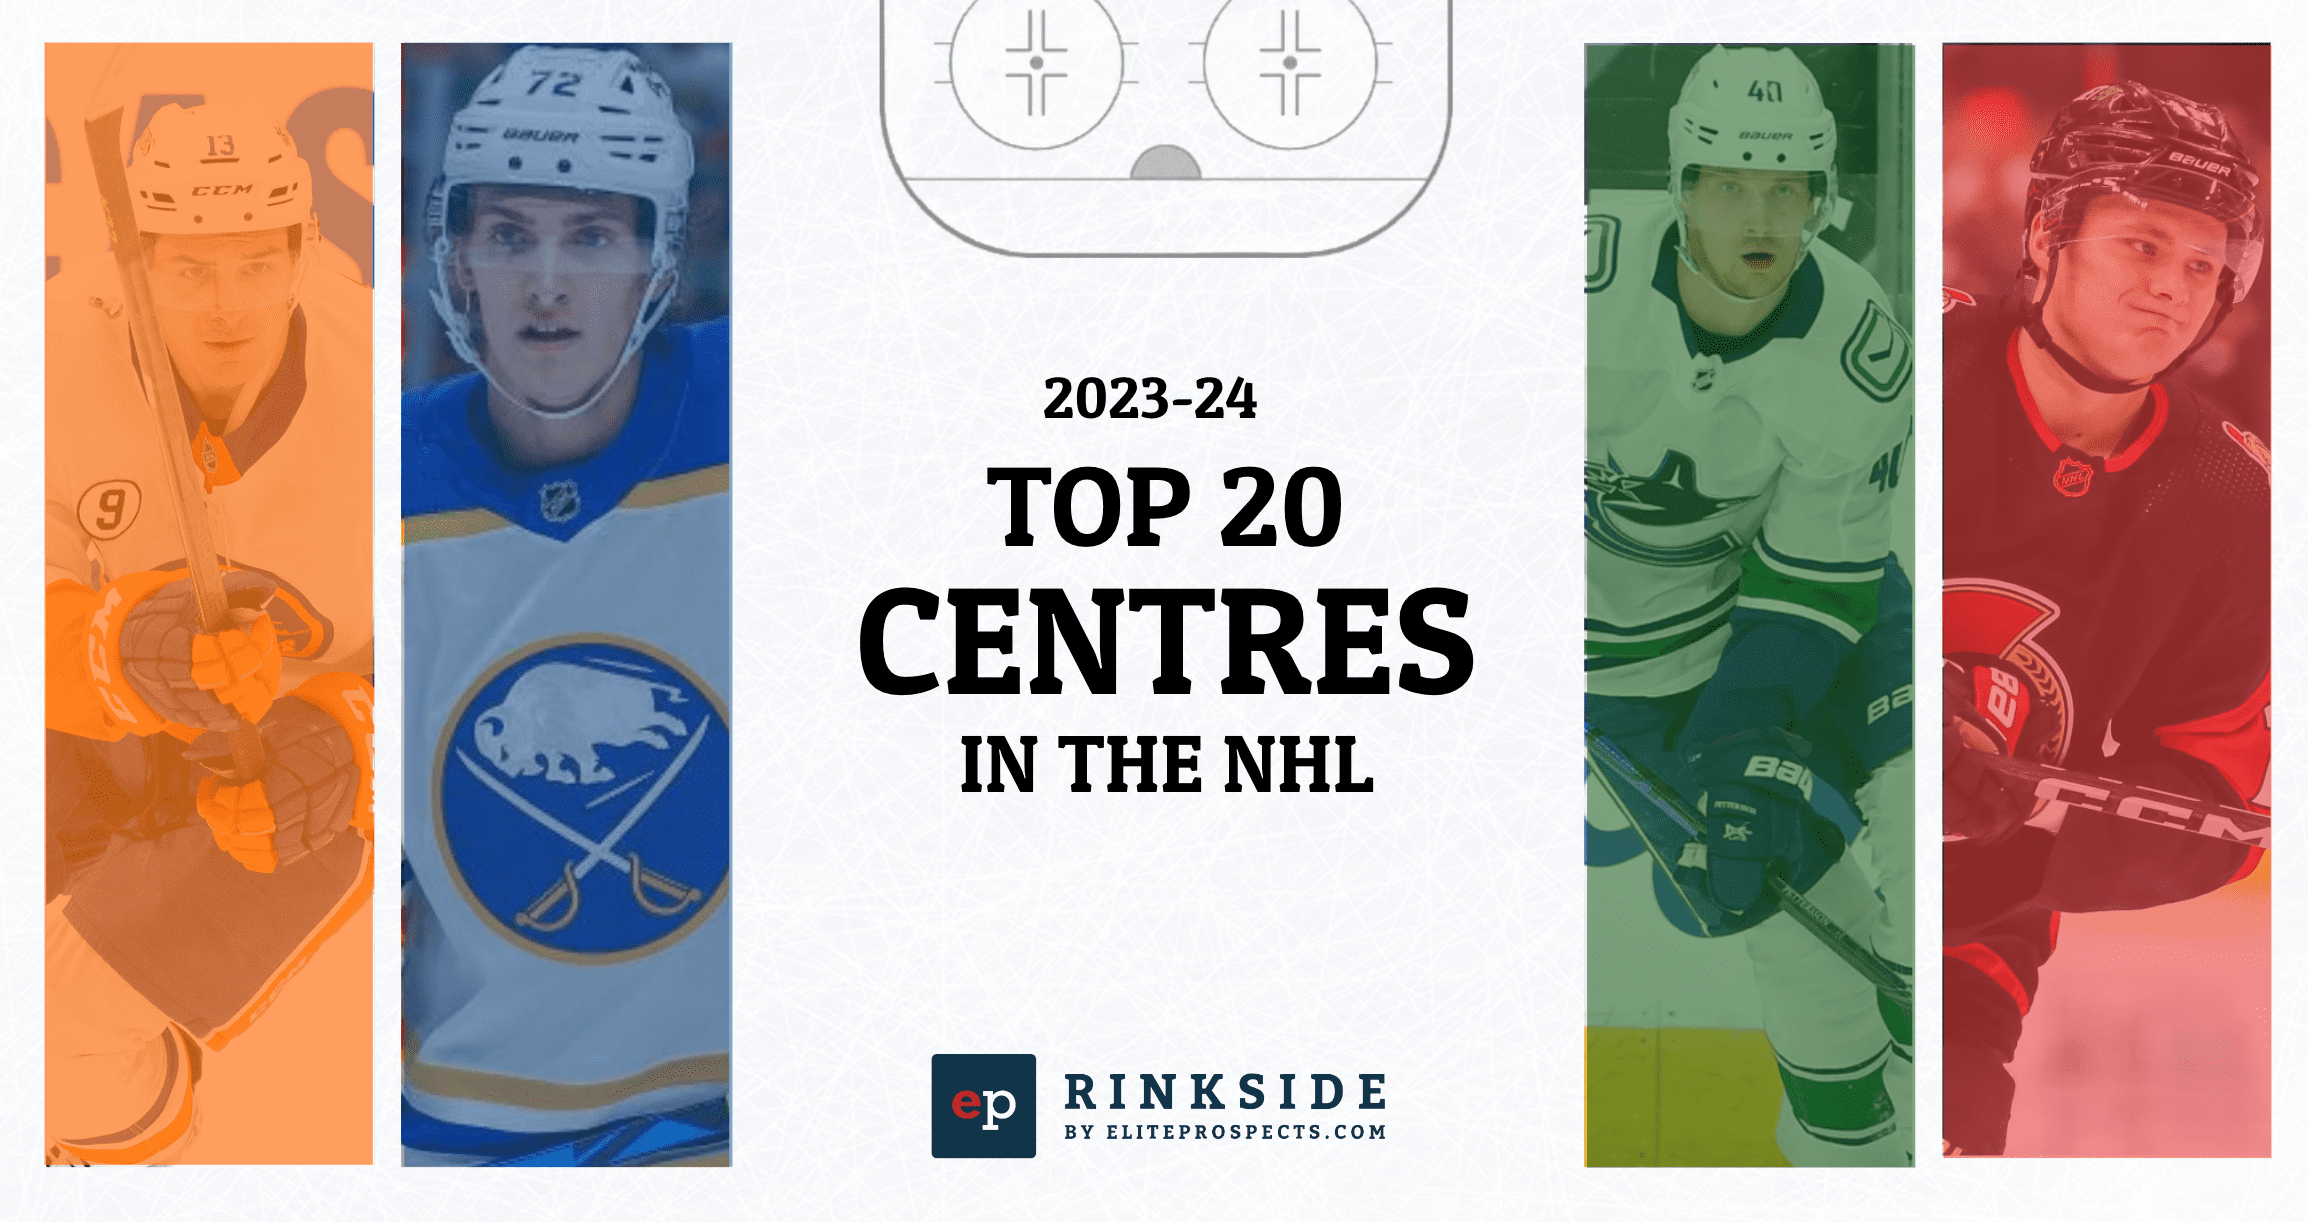 EP Rinkside Top-20 Centres for the 2023-24 season